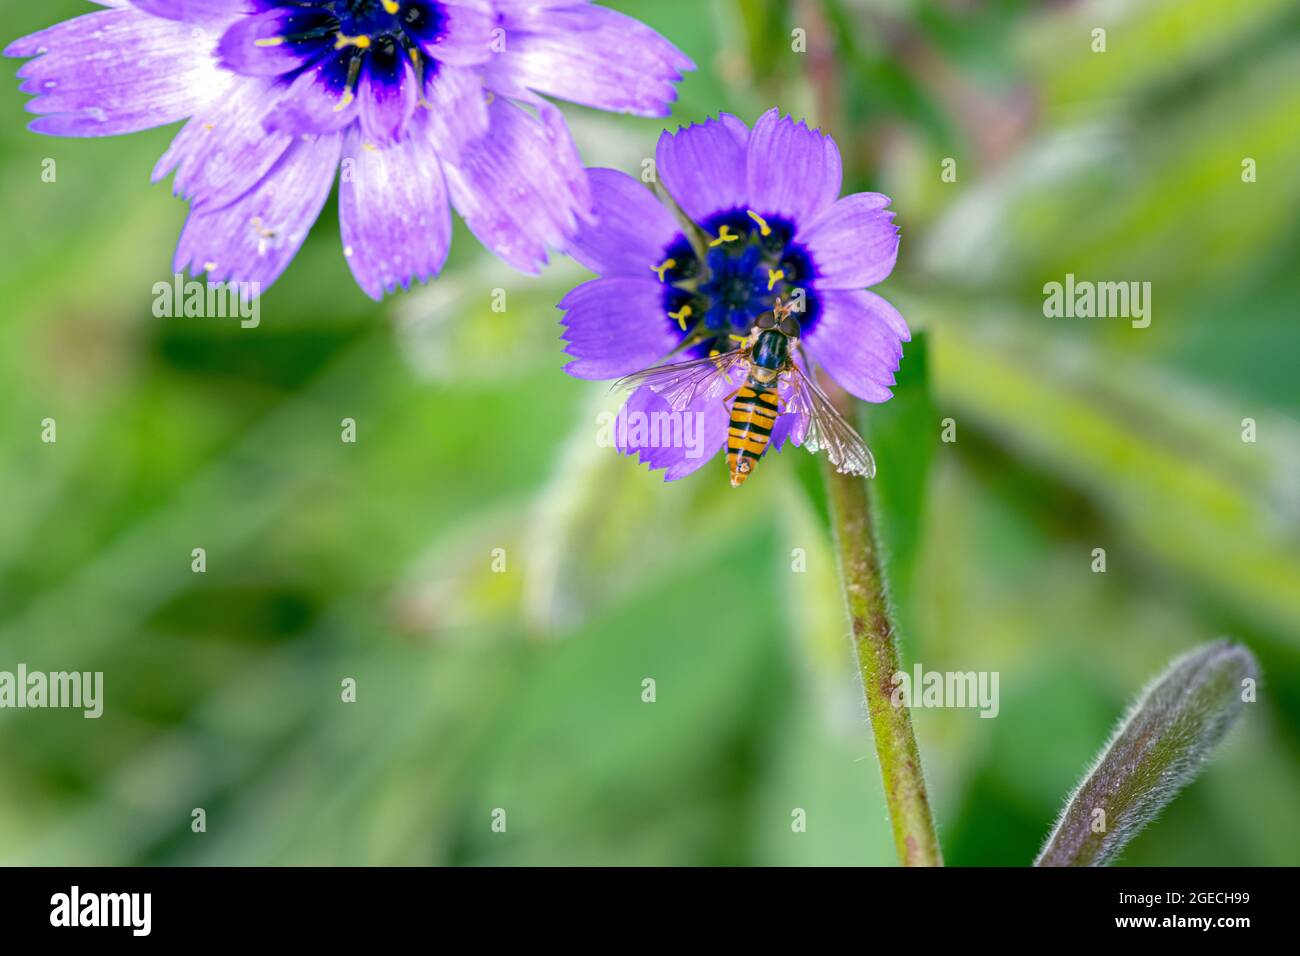 Marmalade hoverfly or Episyrphus balteatus on a blue flower of Catananche caerulea or cupid's dart in the garden in summer Stock Photo